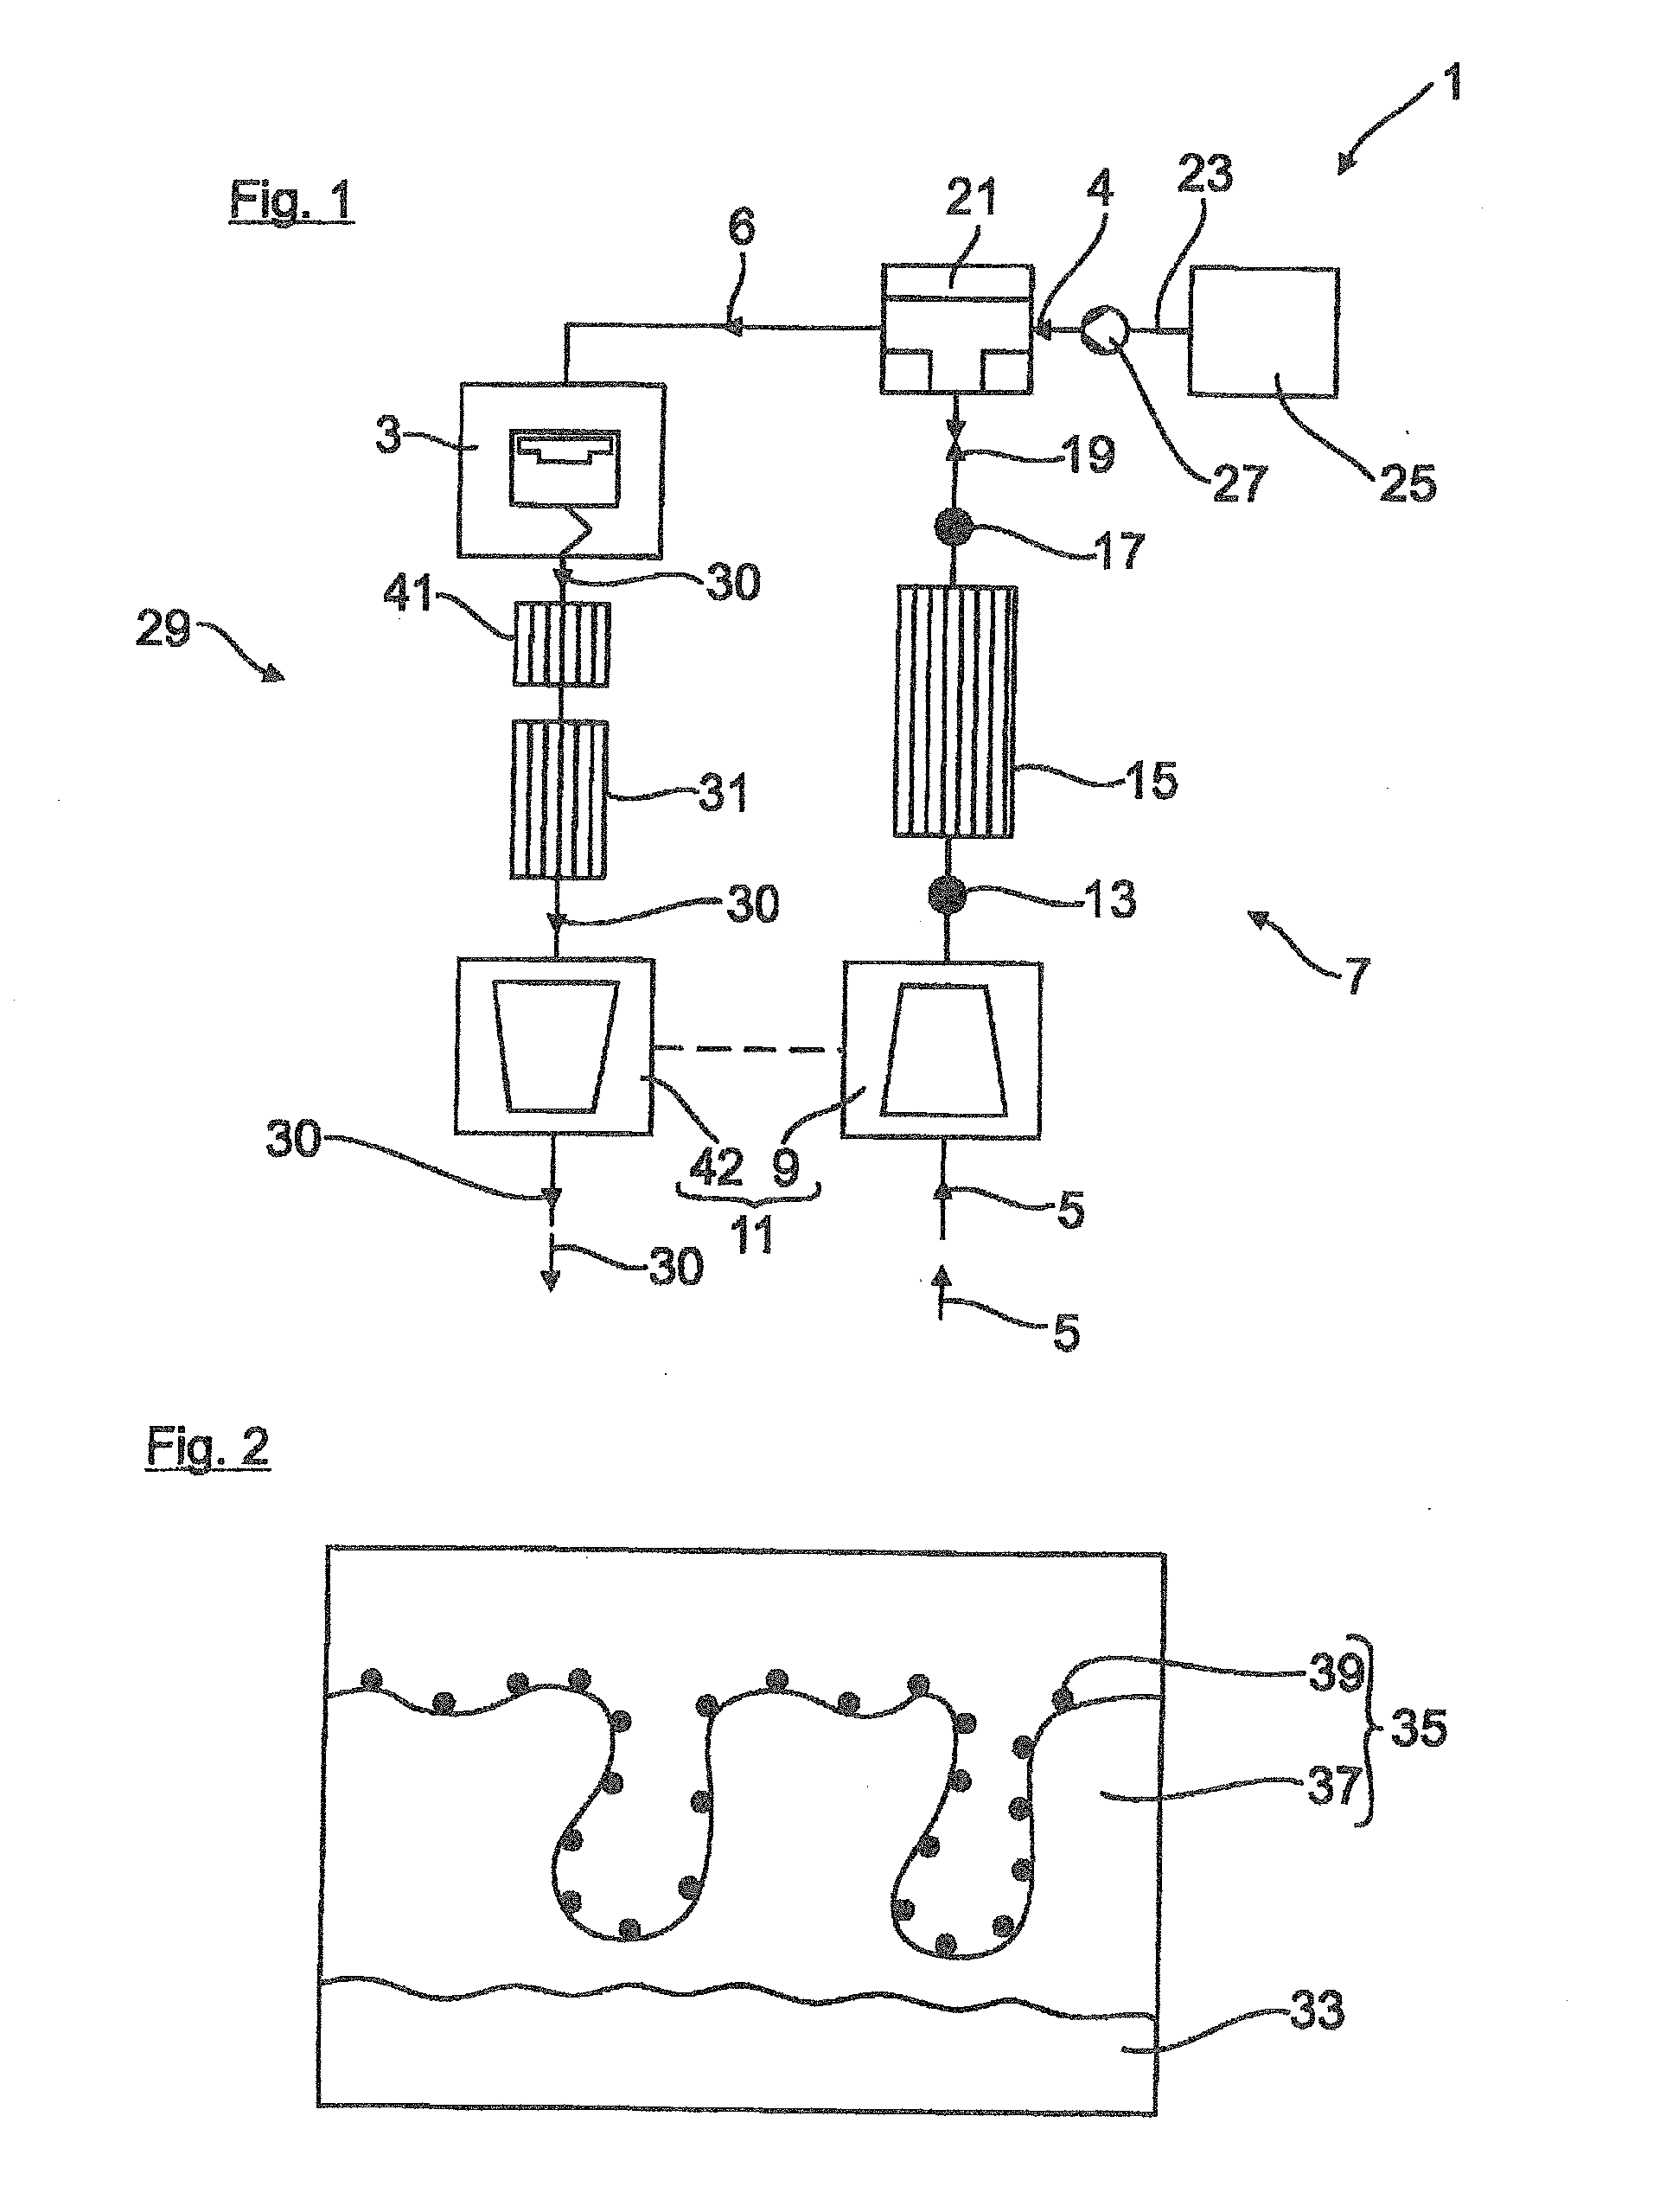 Method for Operating a Gas Engine